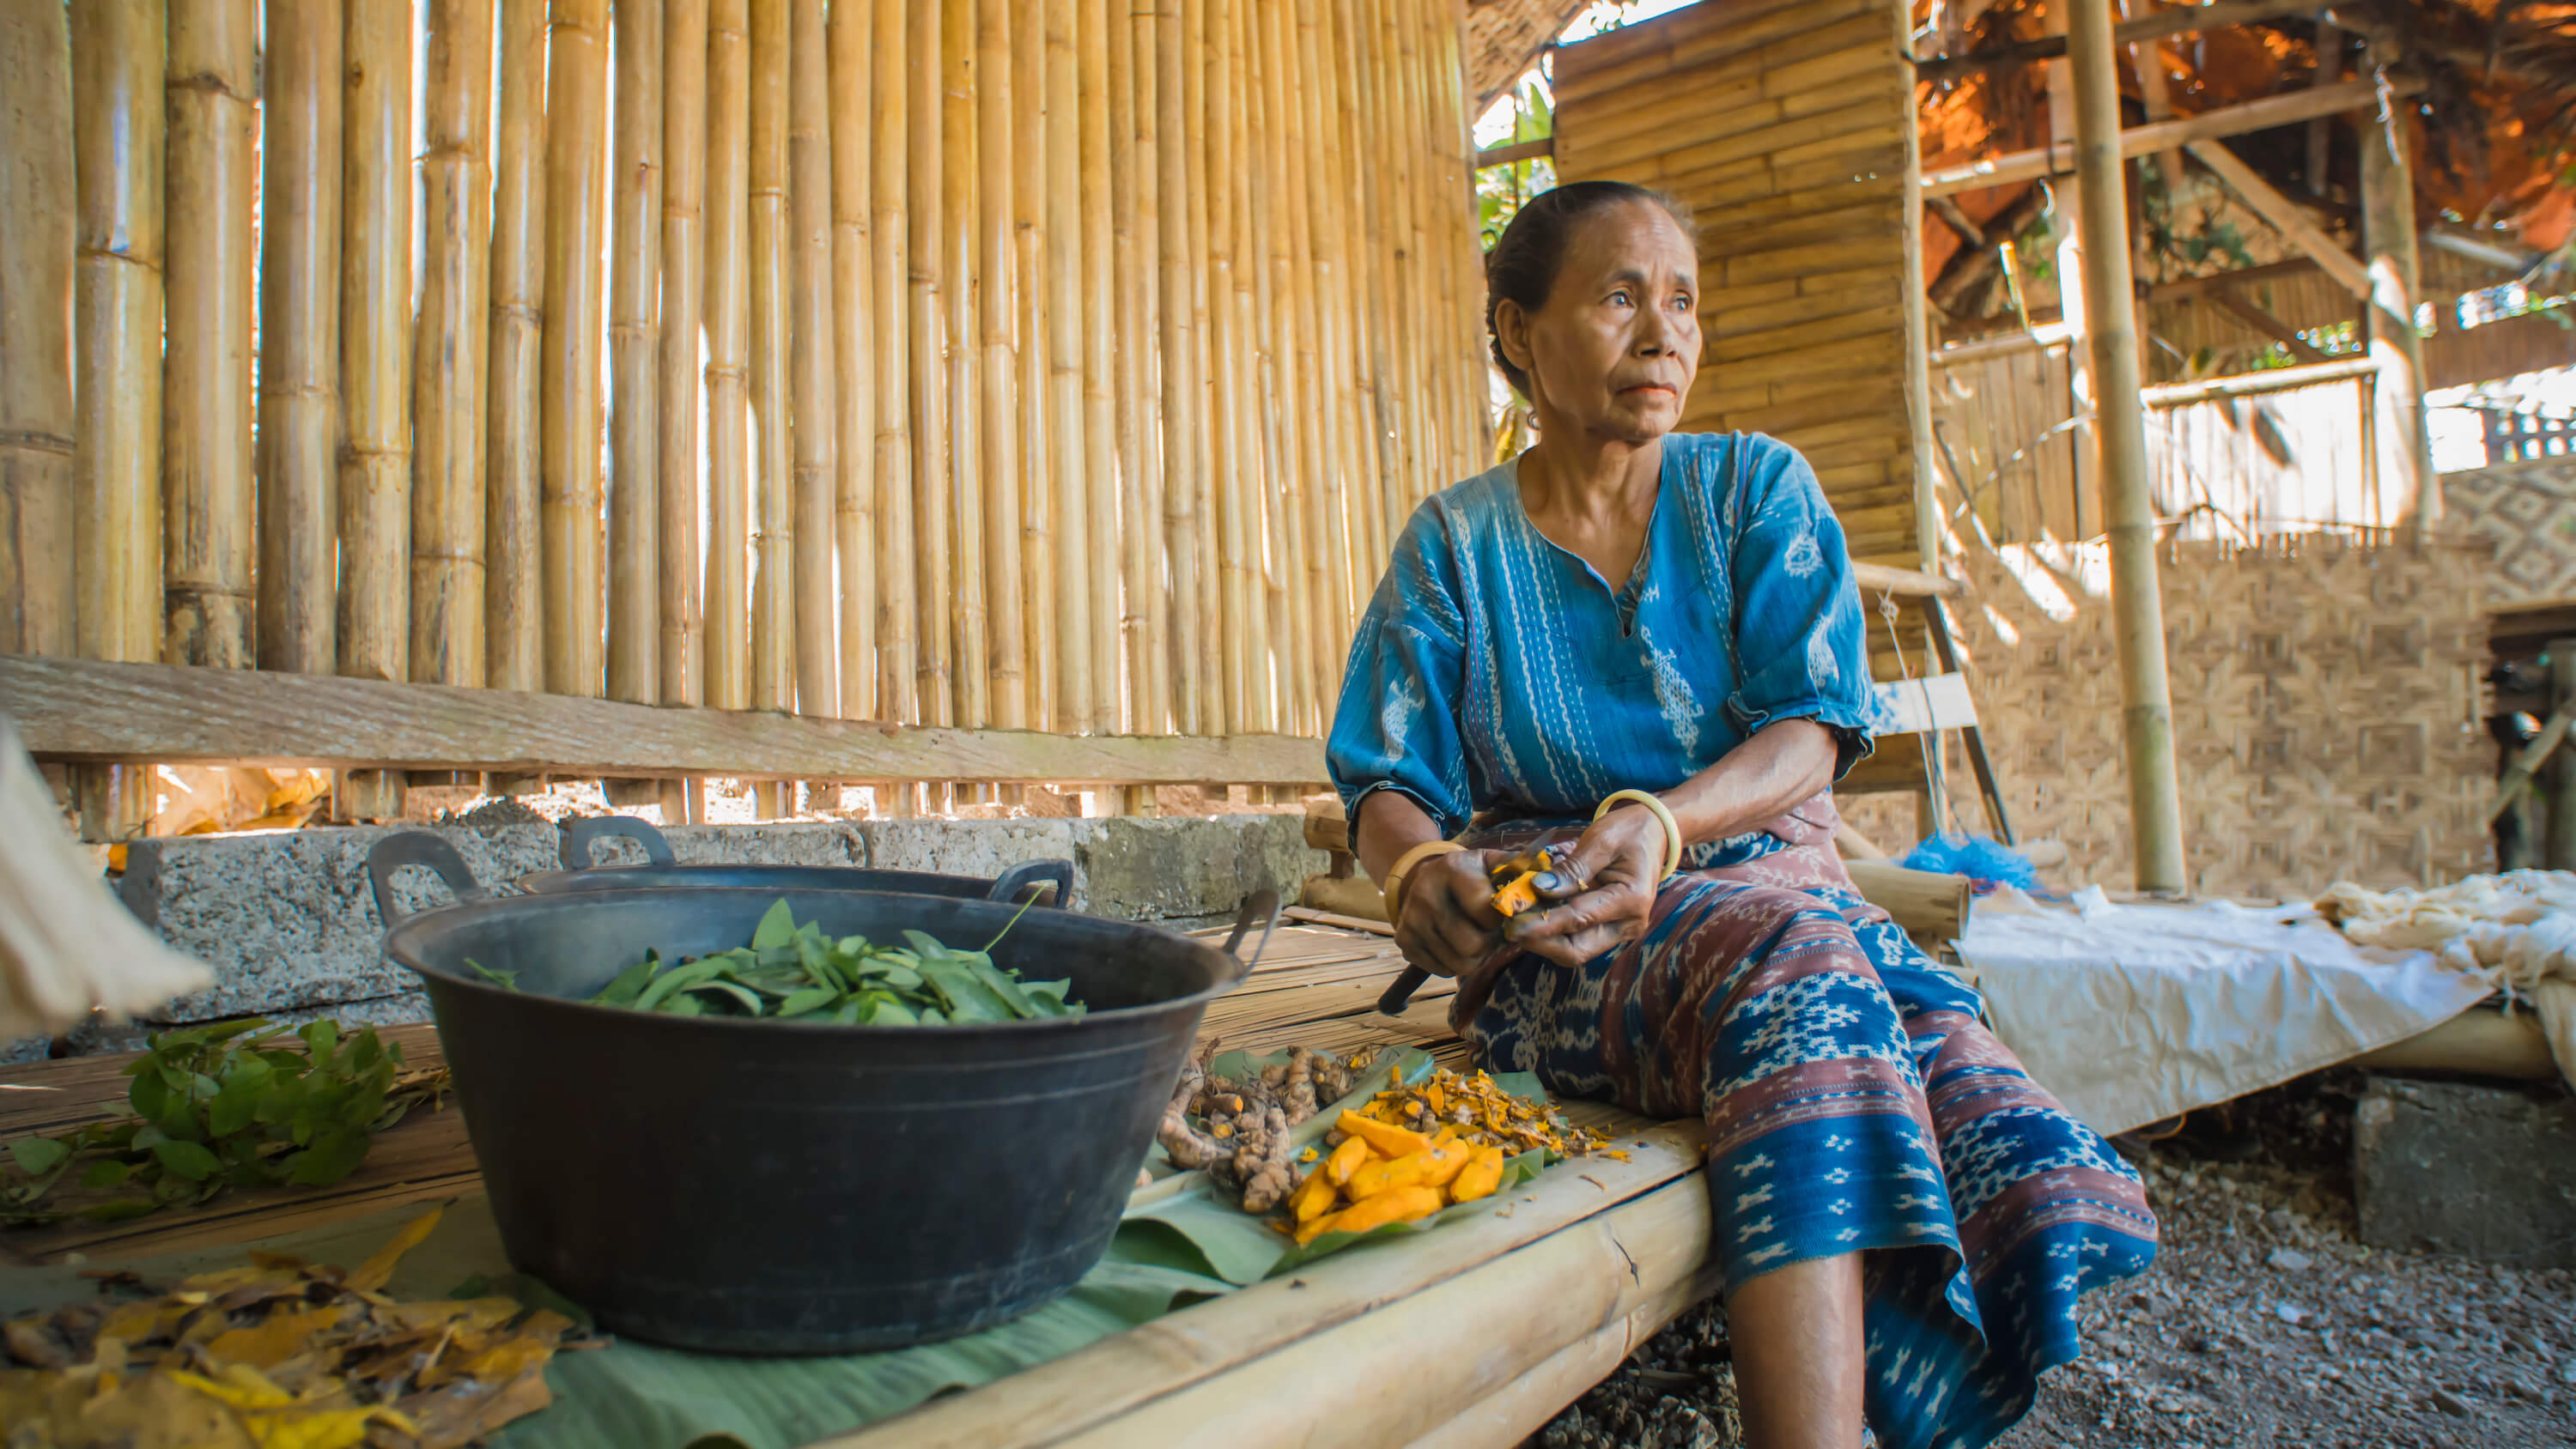 Watubo uses only vegetable dye on their fabrics. This technique is a nod to the community’s ancestral heritage, and it is also less toxic and safer for people and the environment. Here, Maria Roslina prepares turmeric to make yellow dye. Photo by Andra Fembriarto